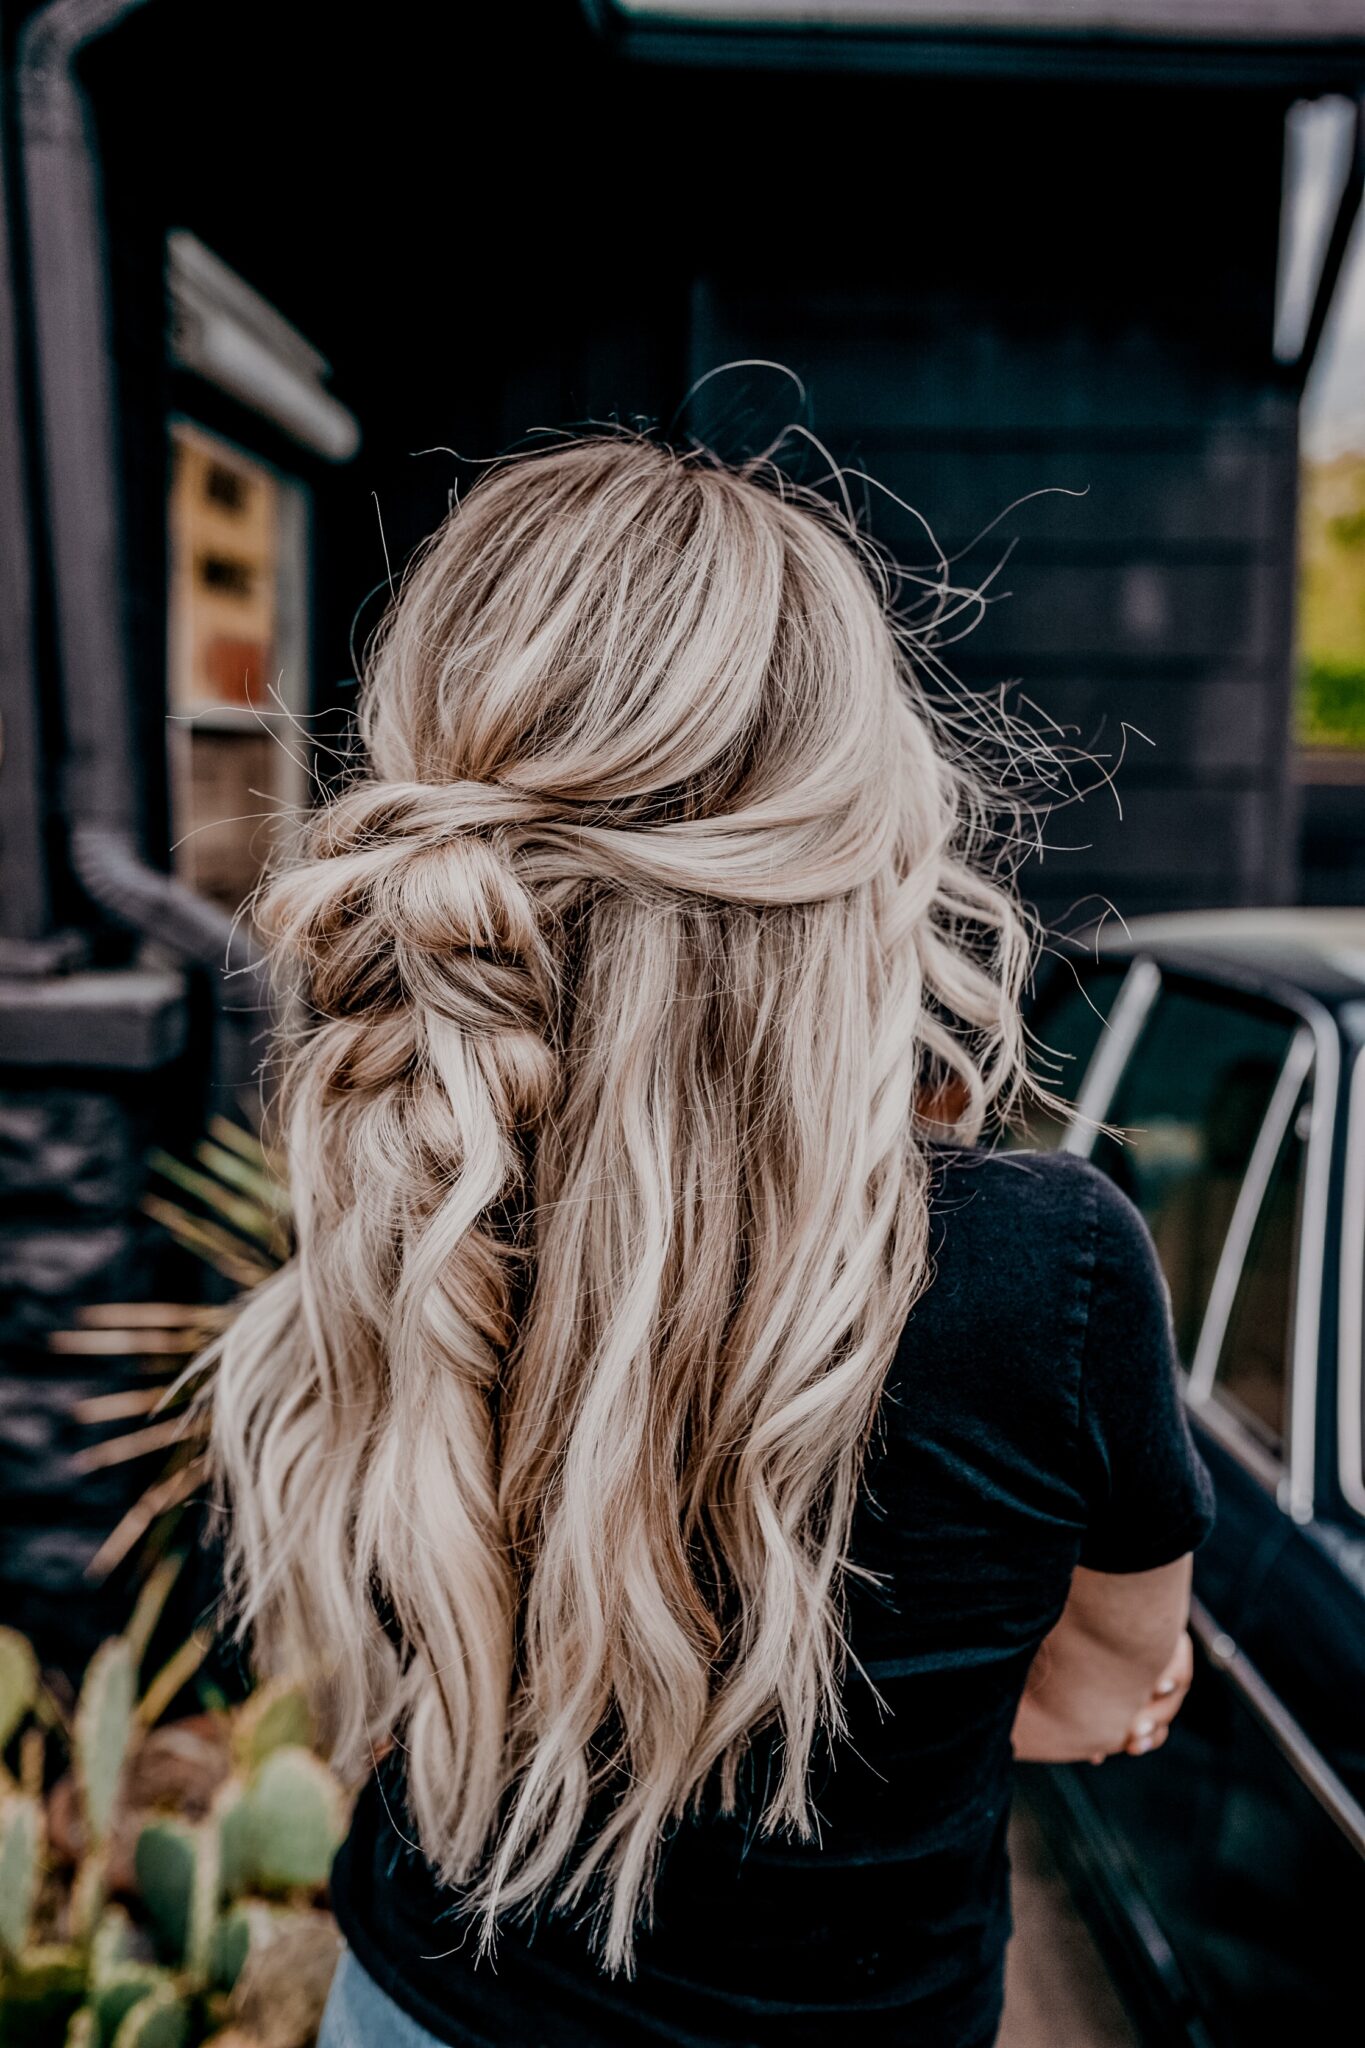 7 Streetstyle Hairstyles That'll Keep You Looking Fab ...